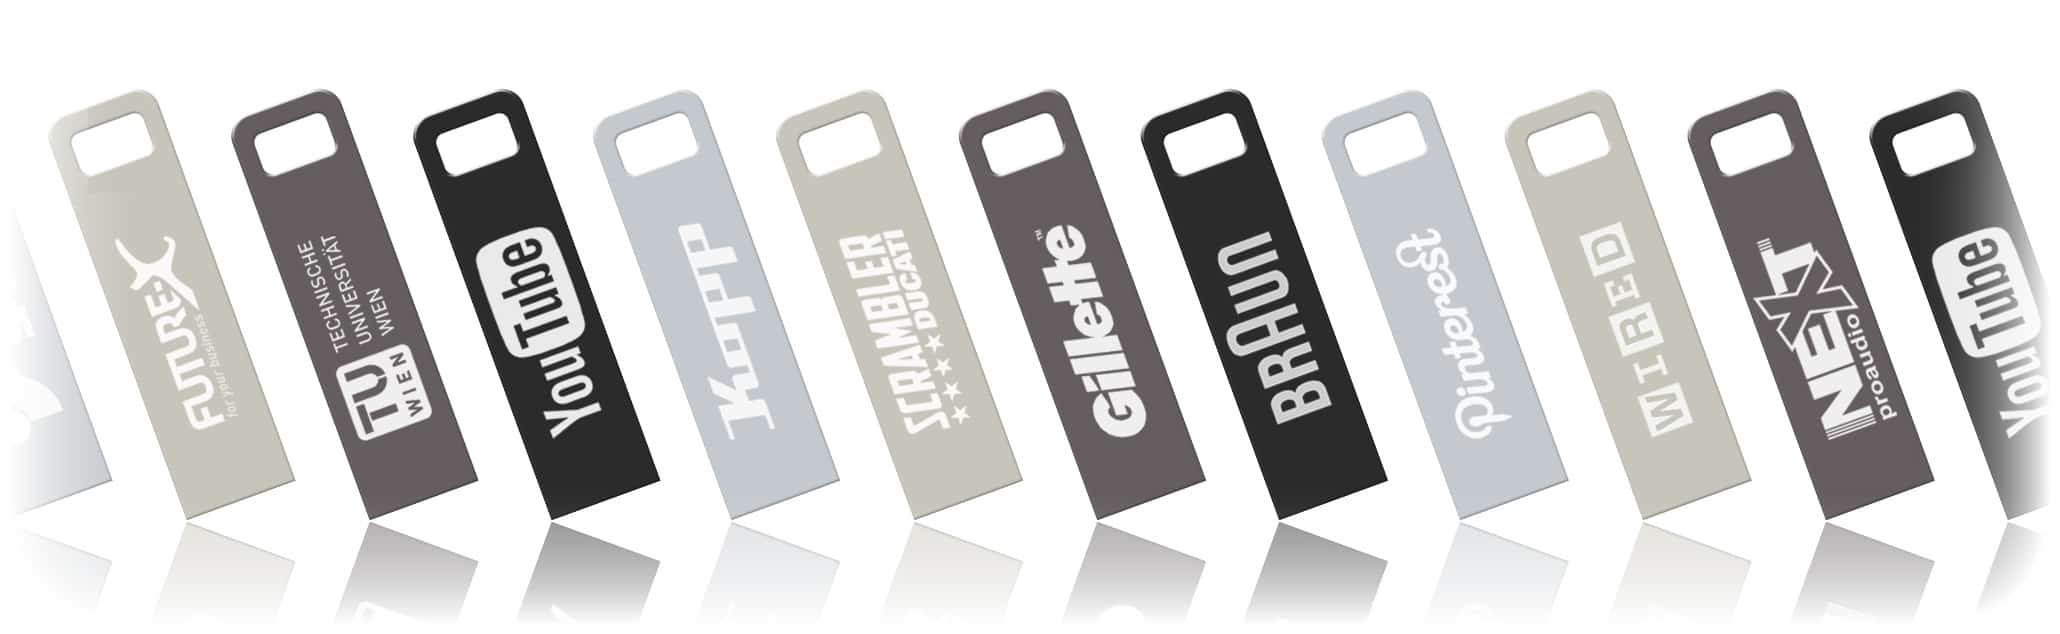 USB Metal Flash drive china factory suppliers